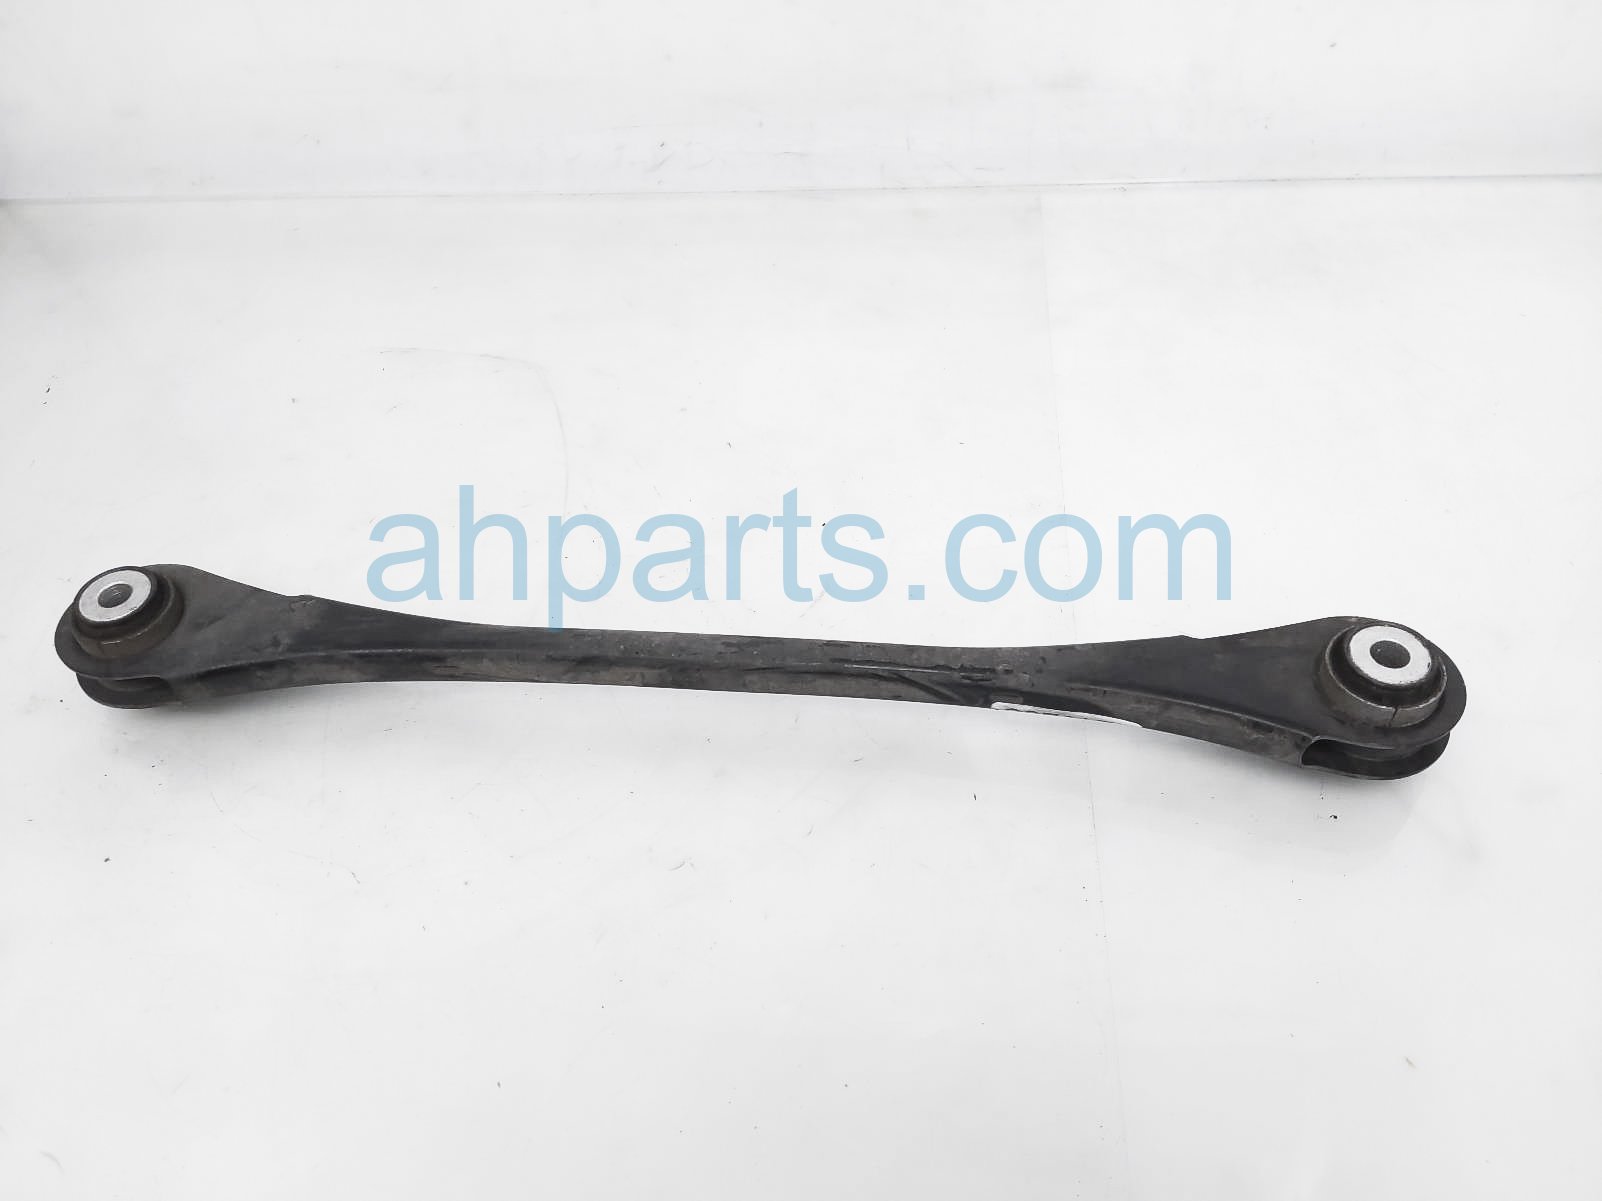 $30 BMW RR/LH LATERAL GUIDE CONTROL ARM